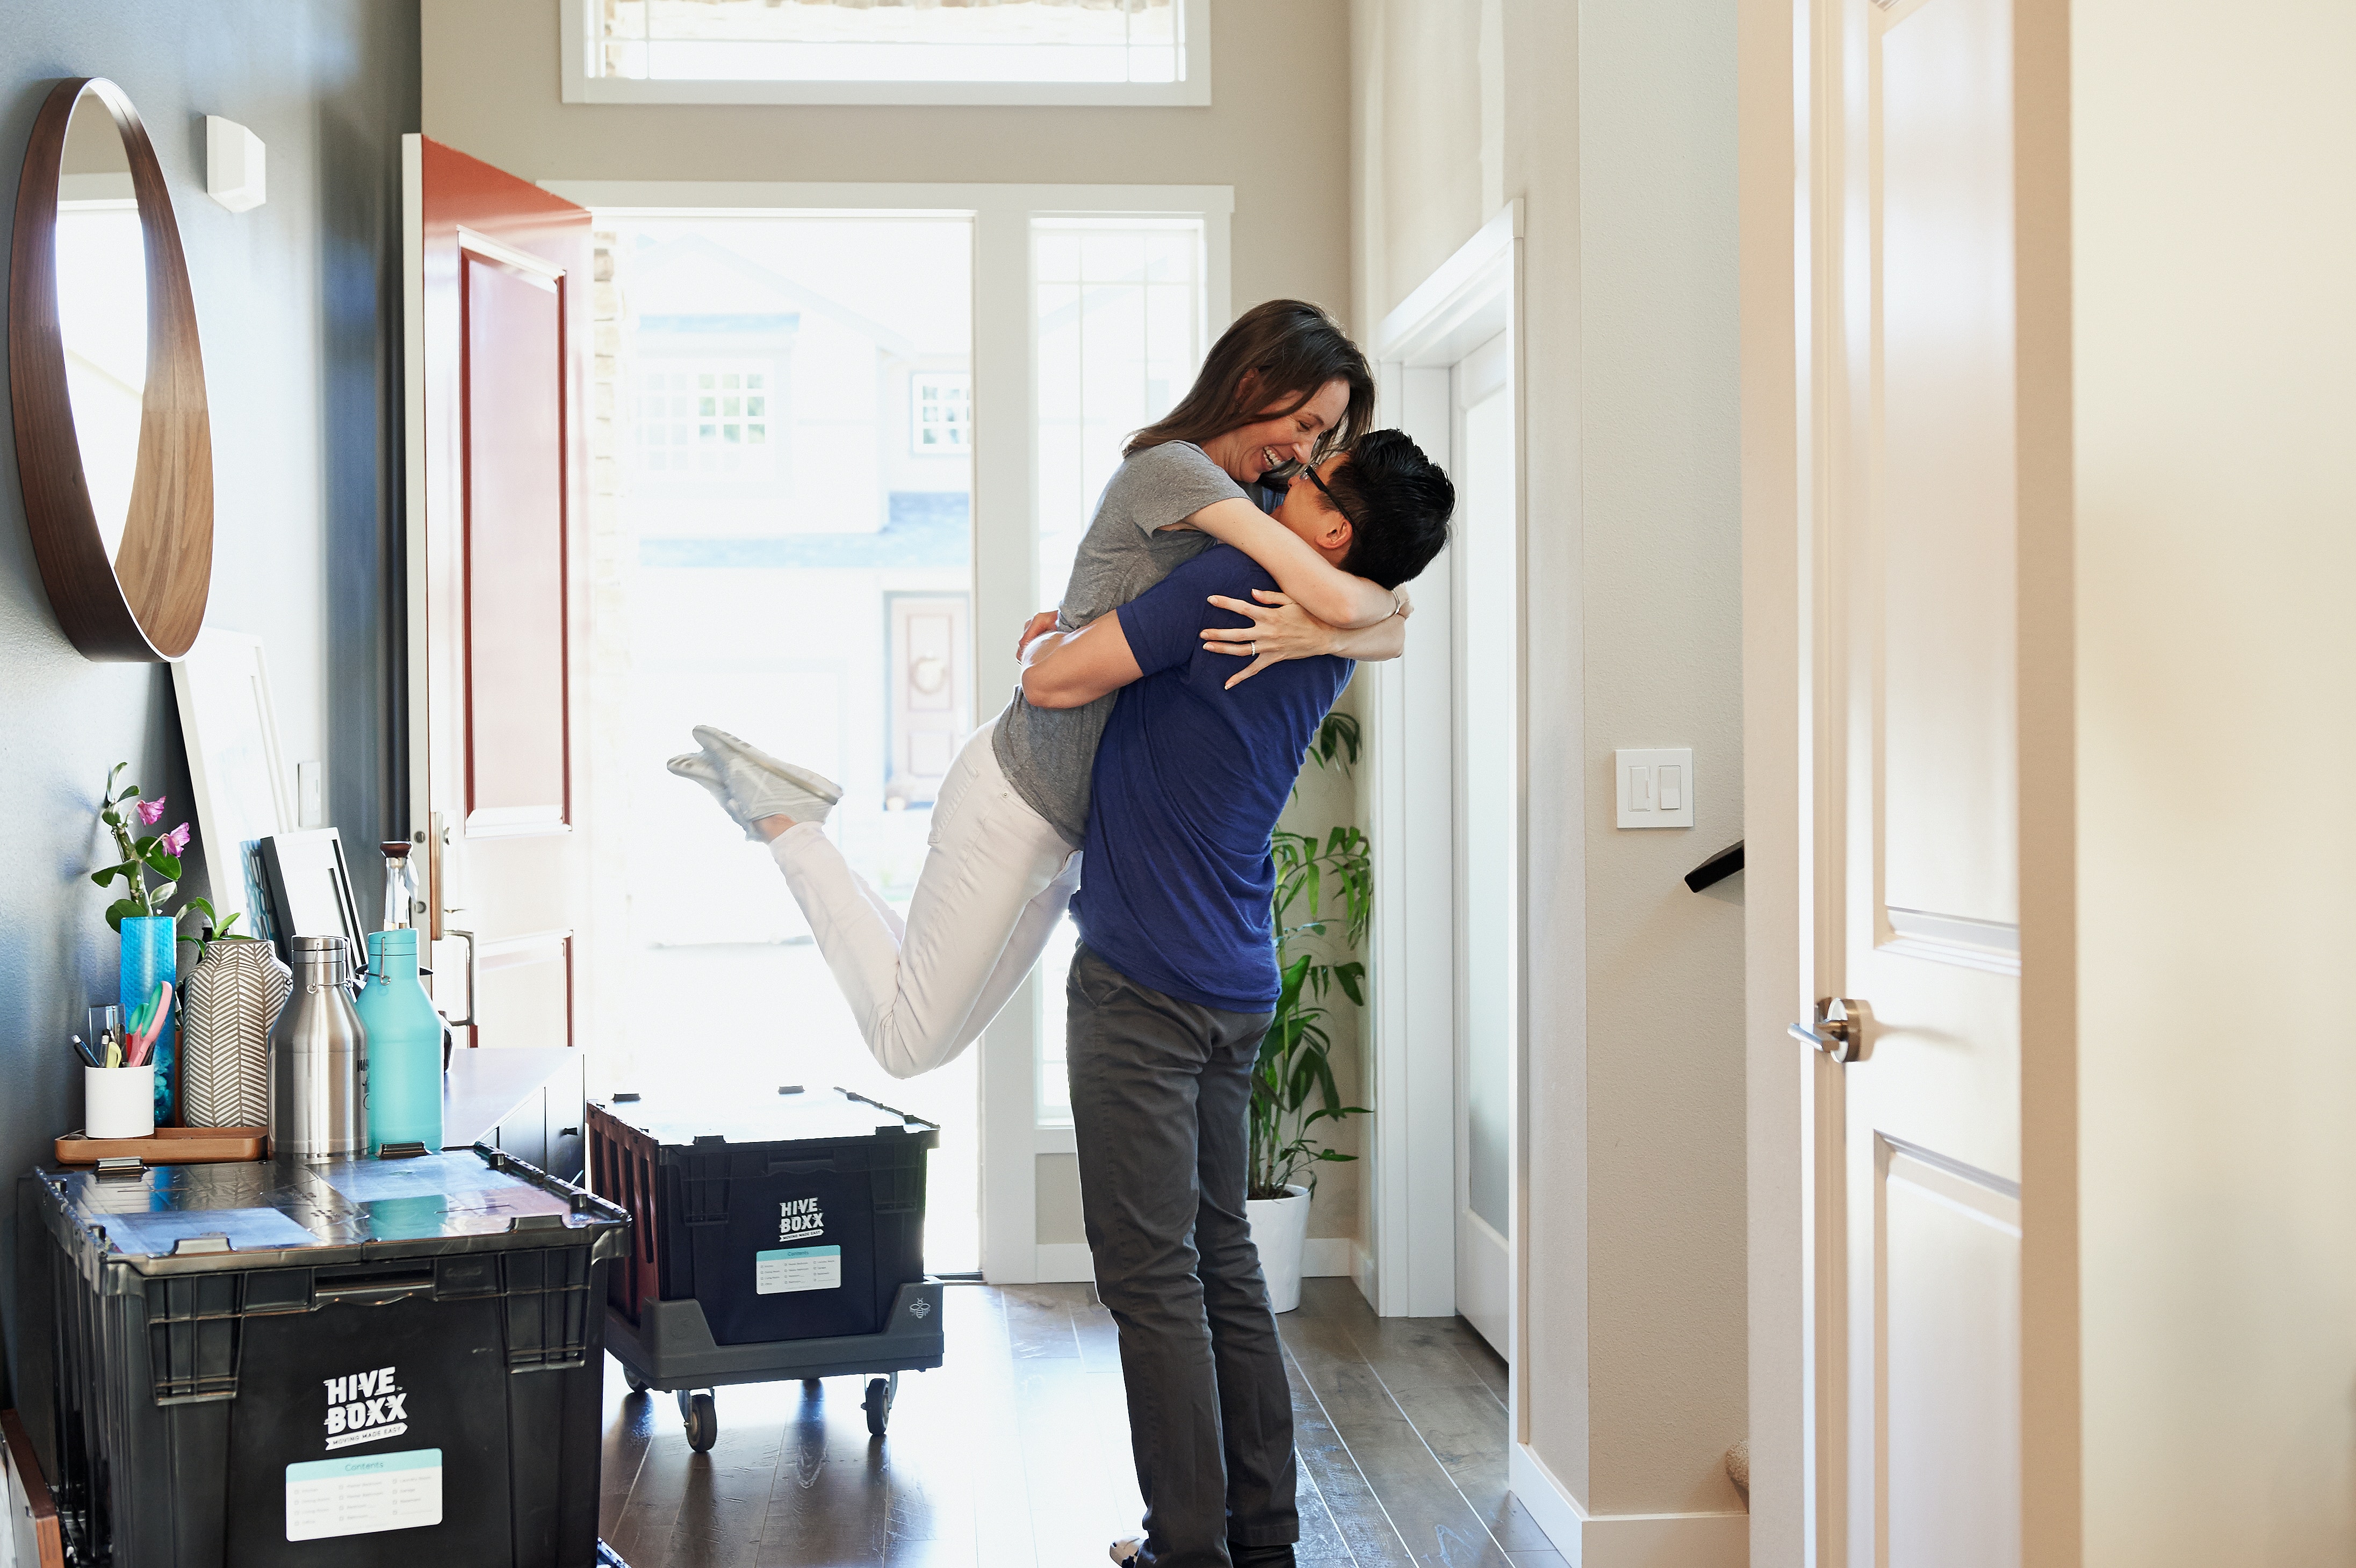 Man and woman hugging and happy about moving into a new house with crates.